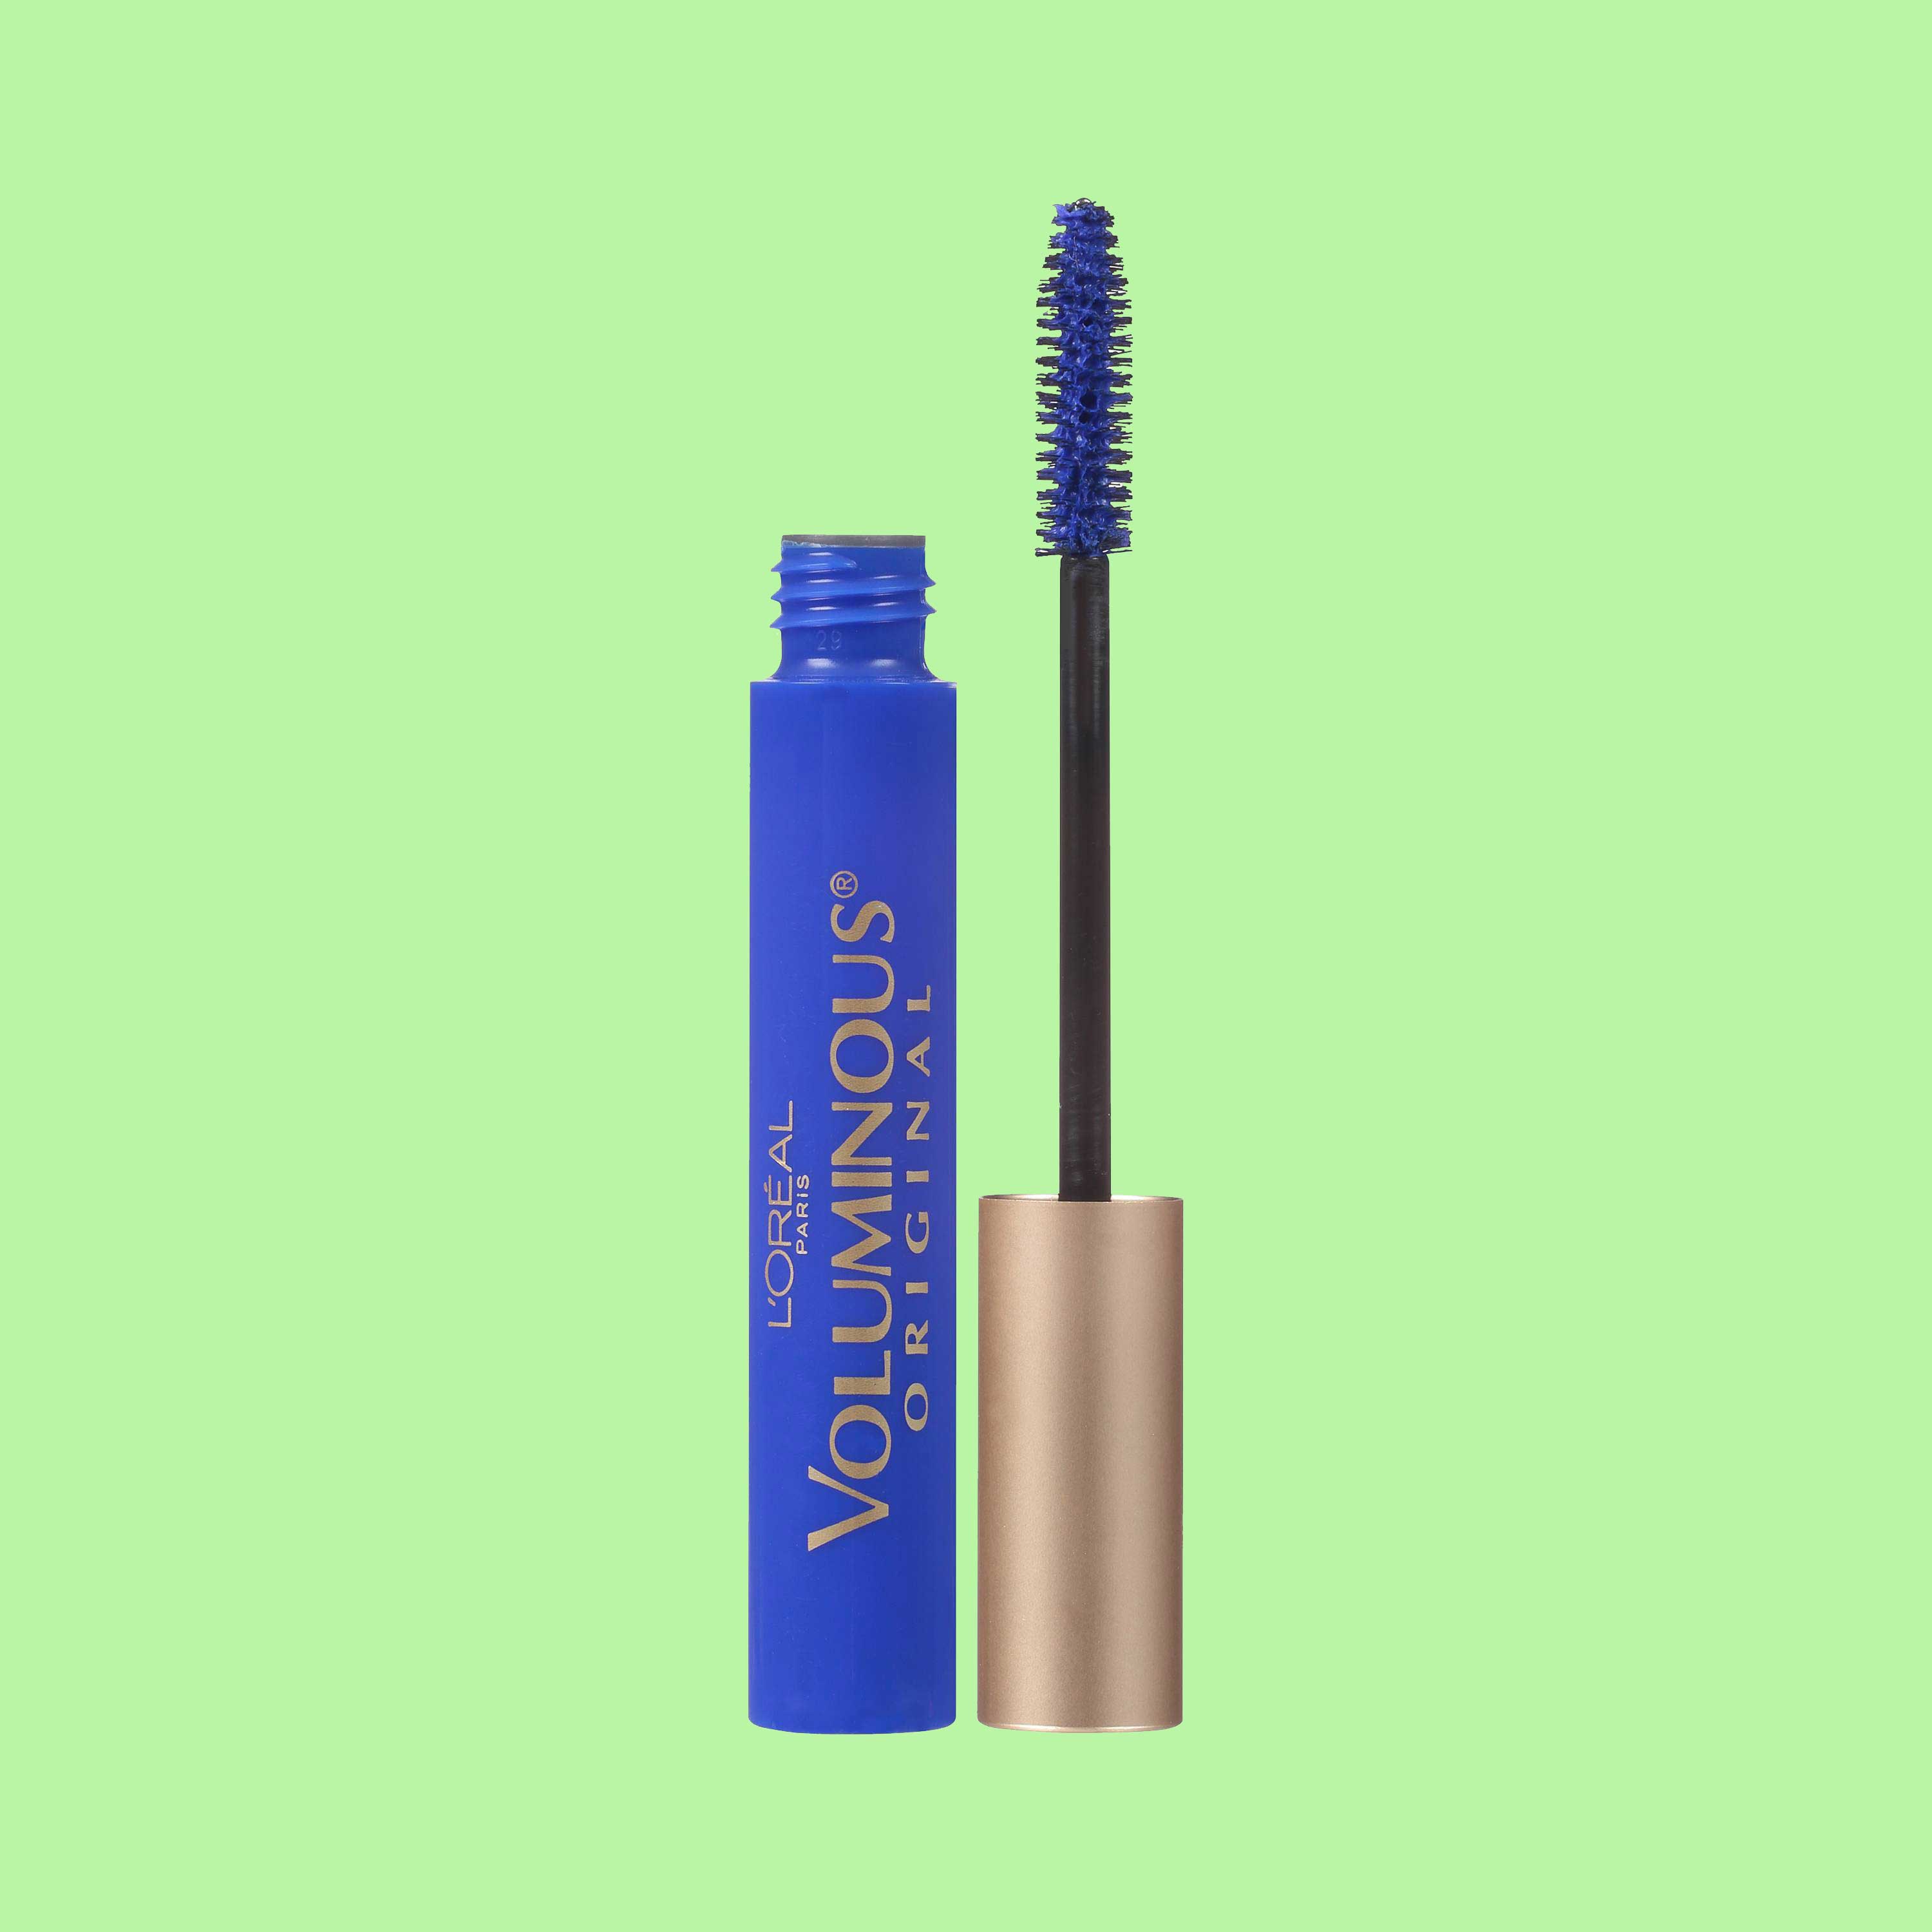 These Colorful Mascaras Are The Opposite of Basic
